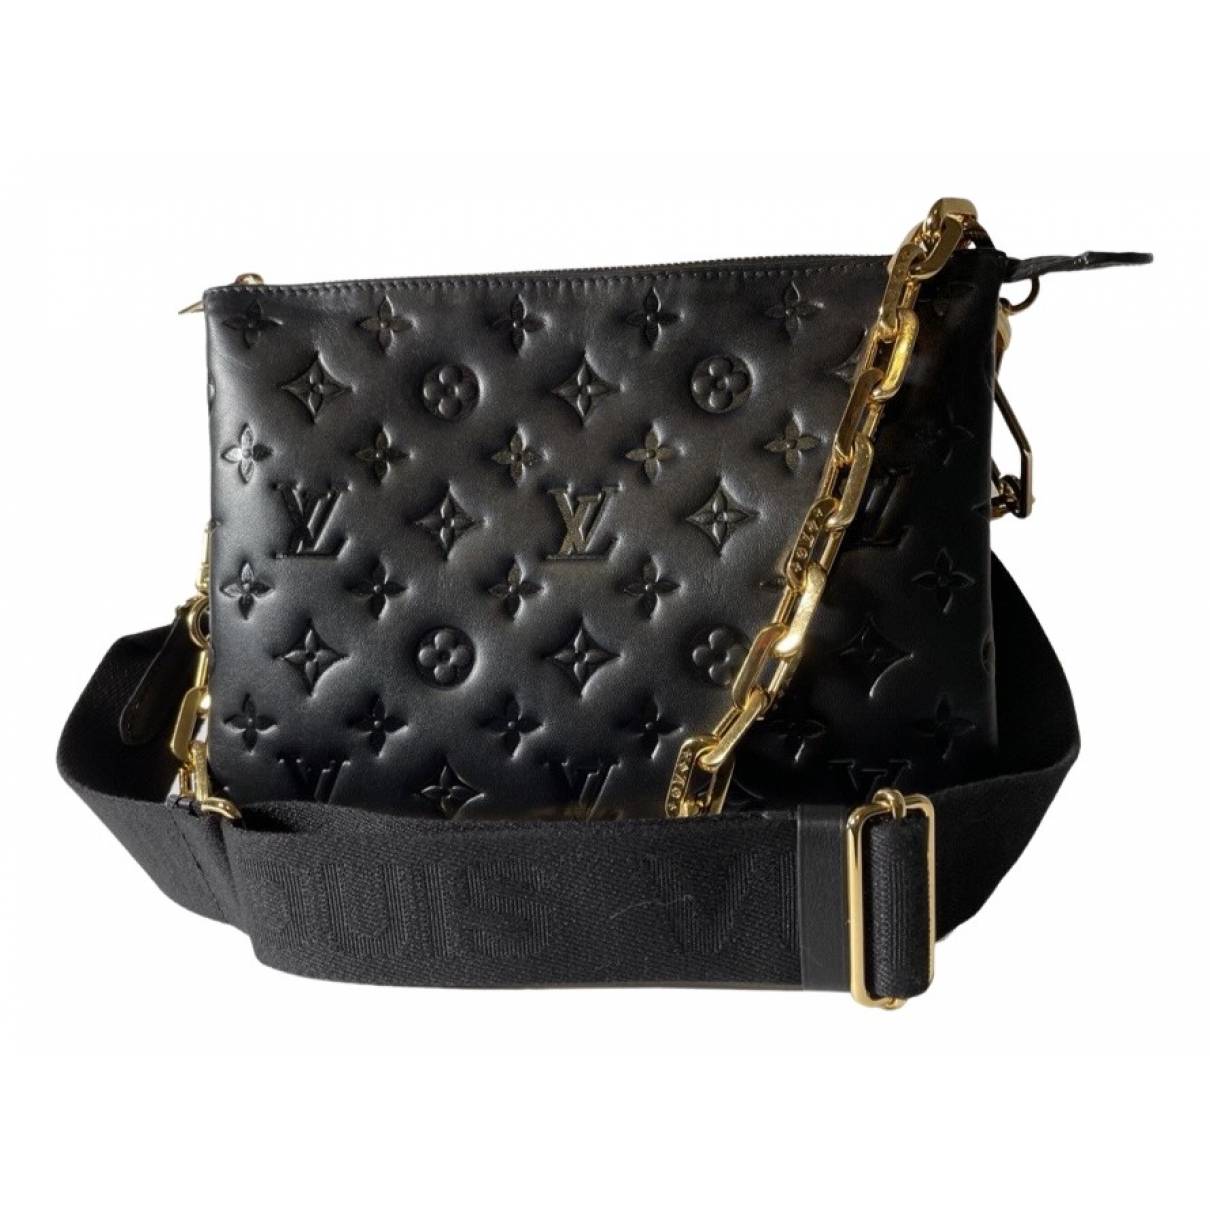 LOUIS VUITTON COUSSIN LEATHER EMBOSSED CROSSBODY BAG